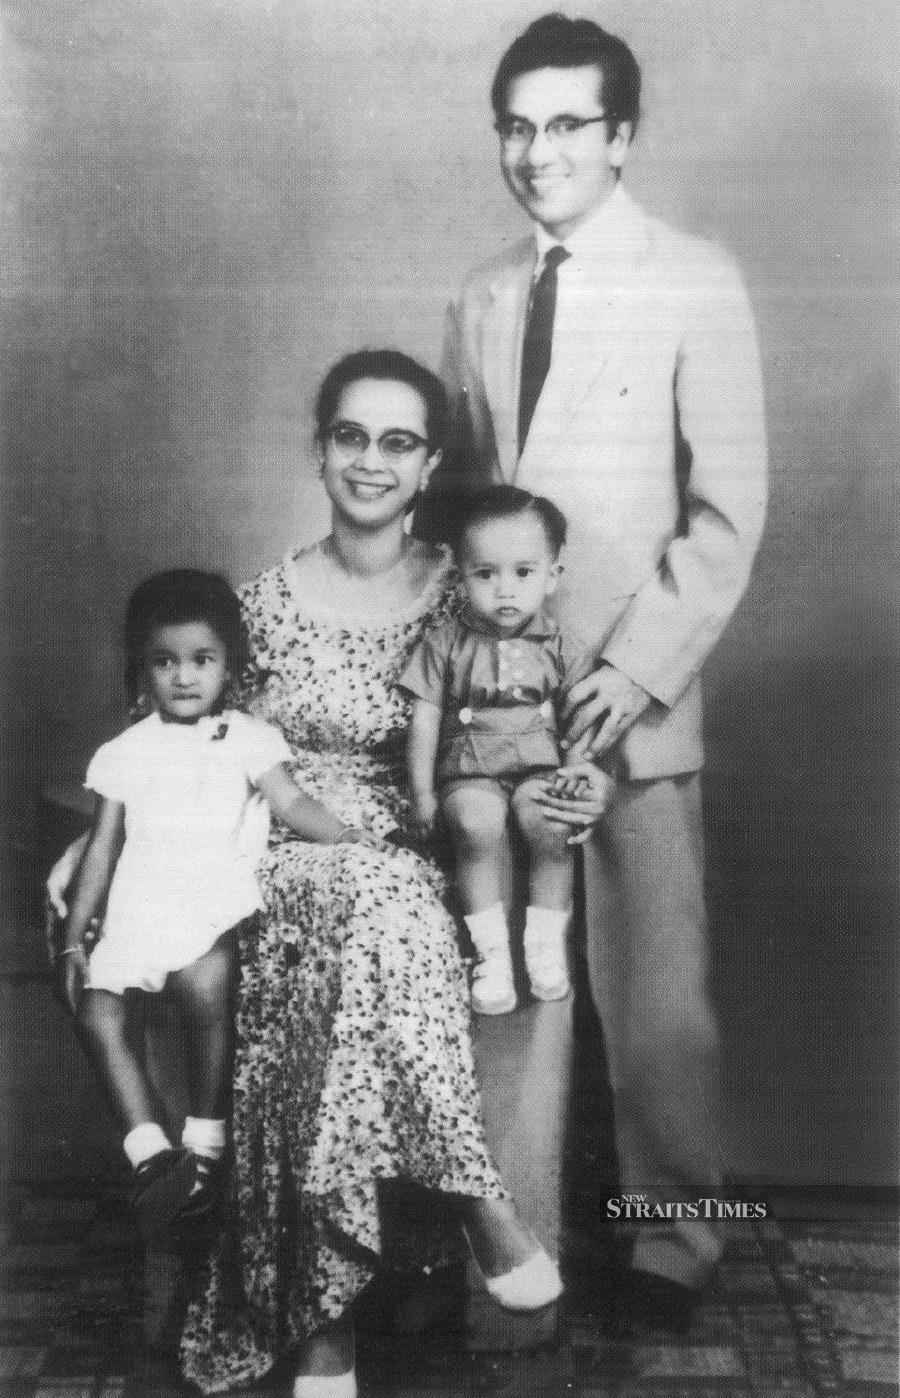  Family portrait at a studio in Alor Setar with Marina and Mirzan.